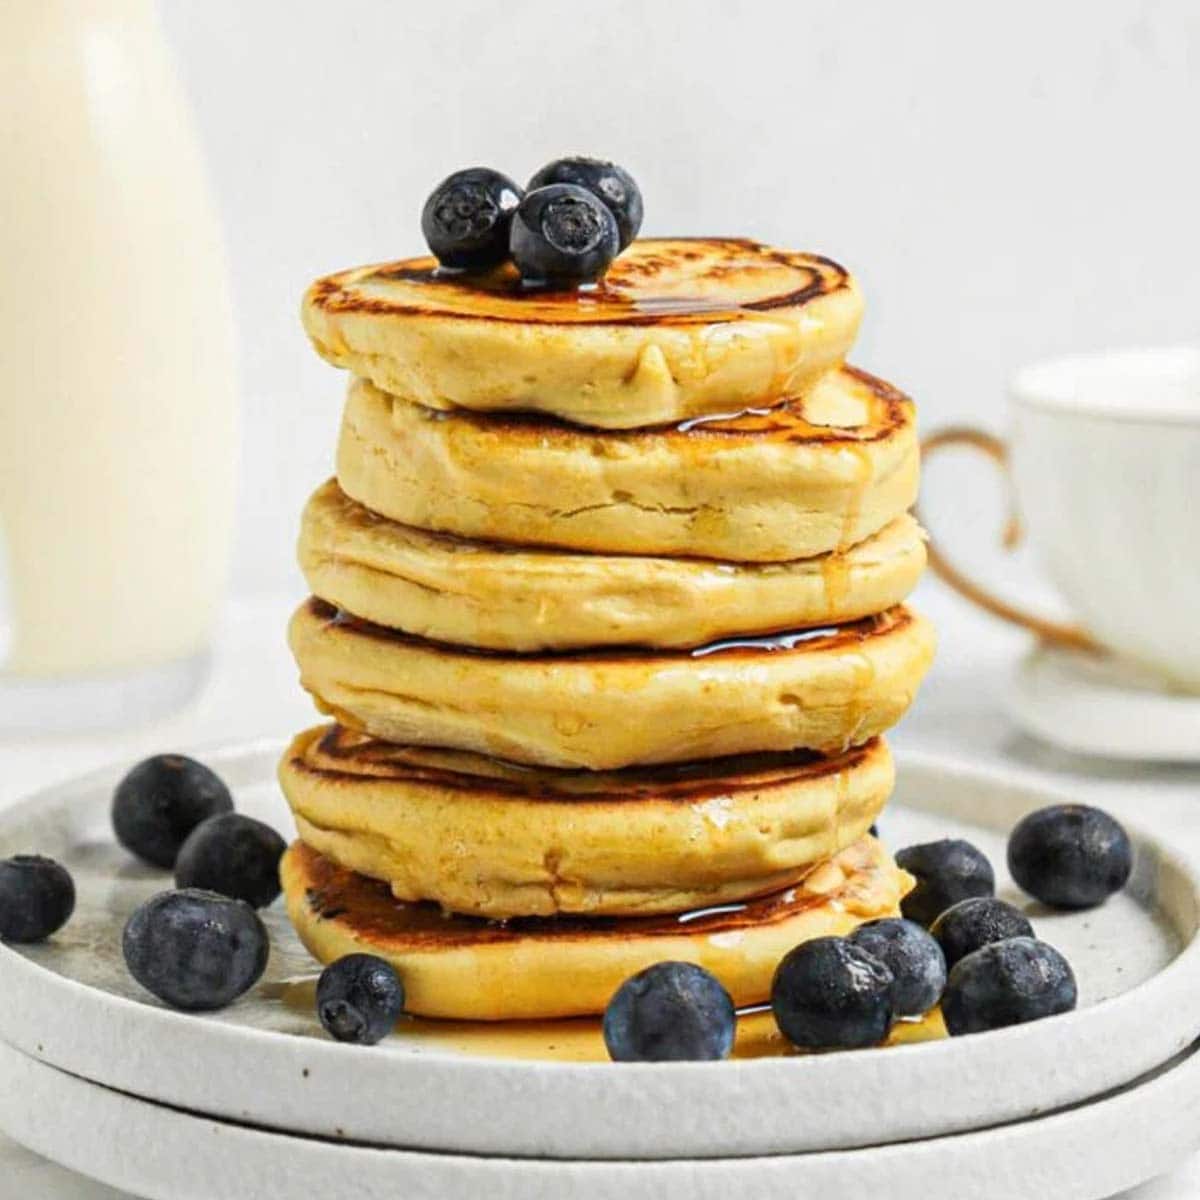 Stack of 6 thick chickpea flour pancakes topped with blueberries and maple syrup on a small plate. A jug of milk and a coffee cup are in the background.